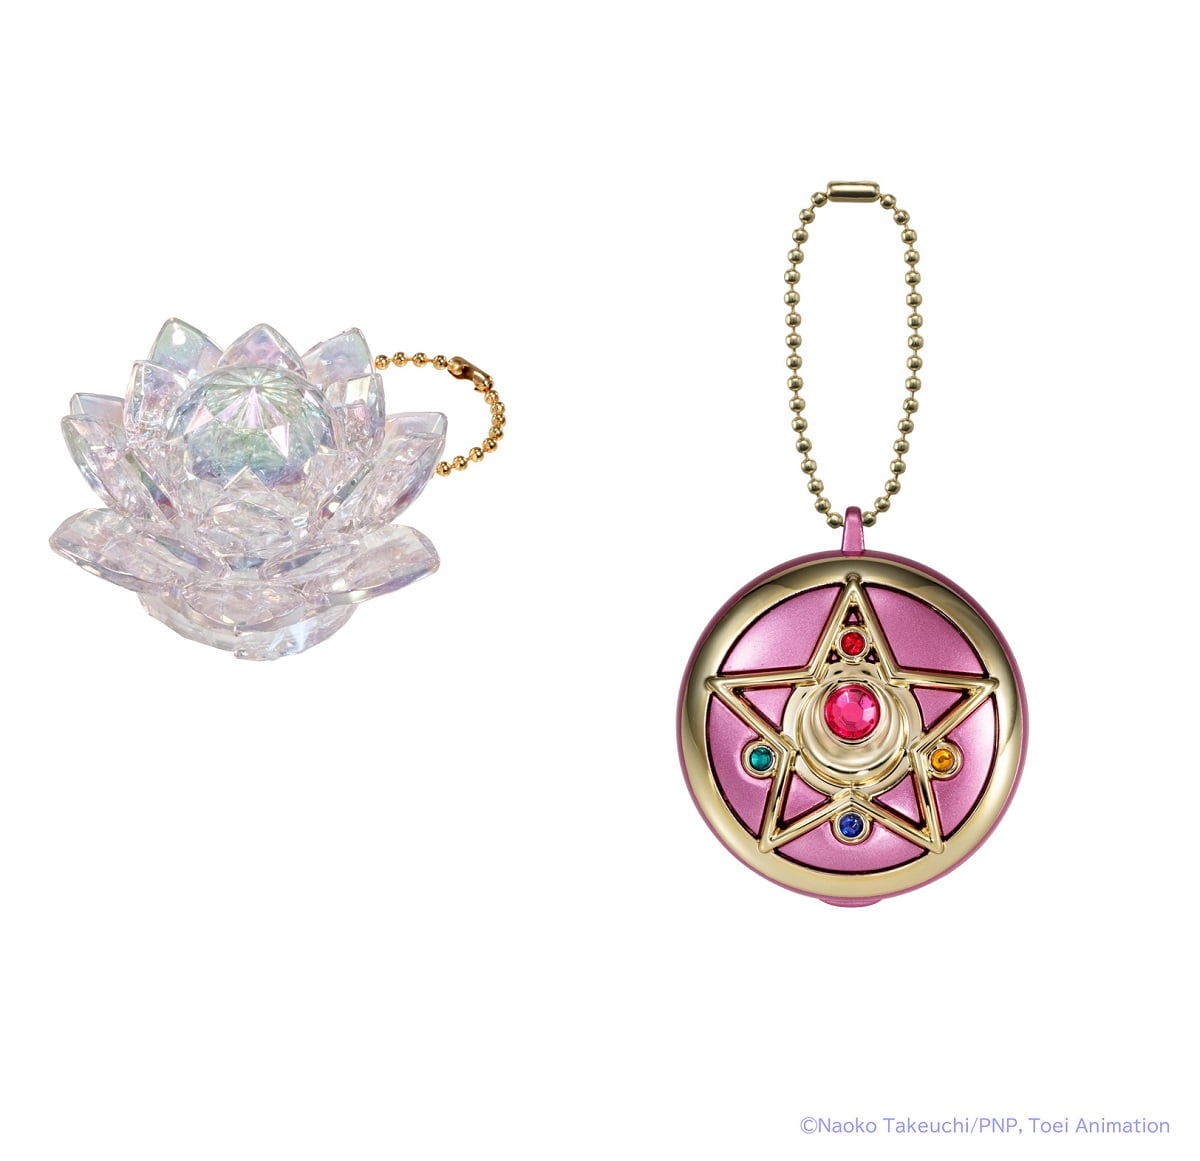 Sailor Moon Crystal Carillon Keychain Ring — Epic Findings, Inc.